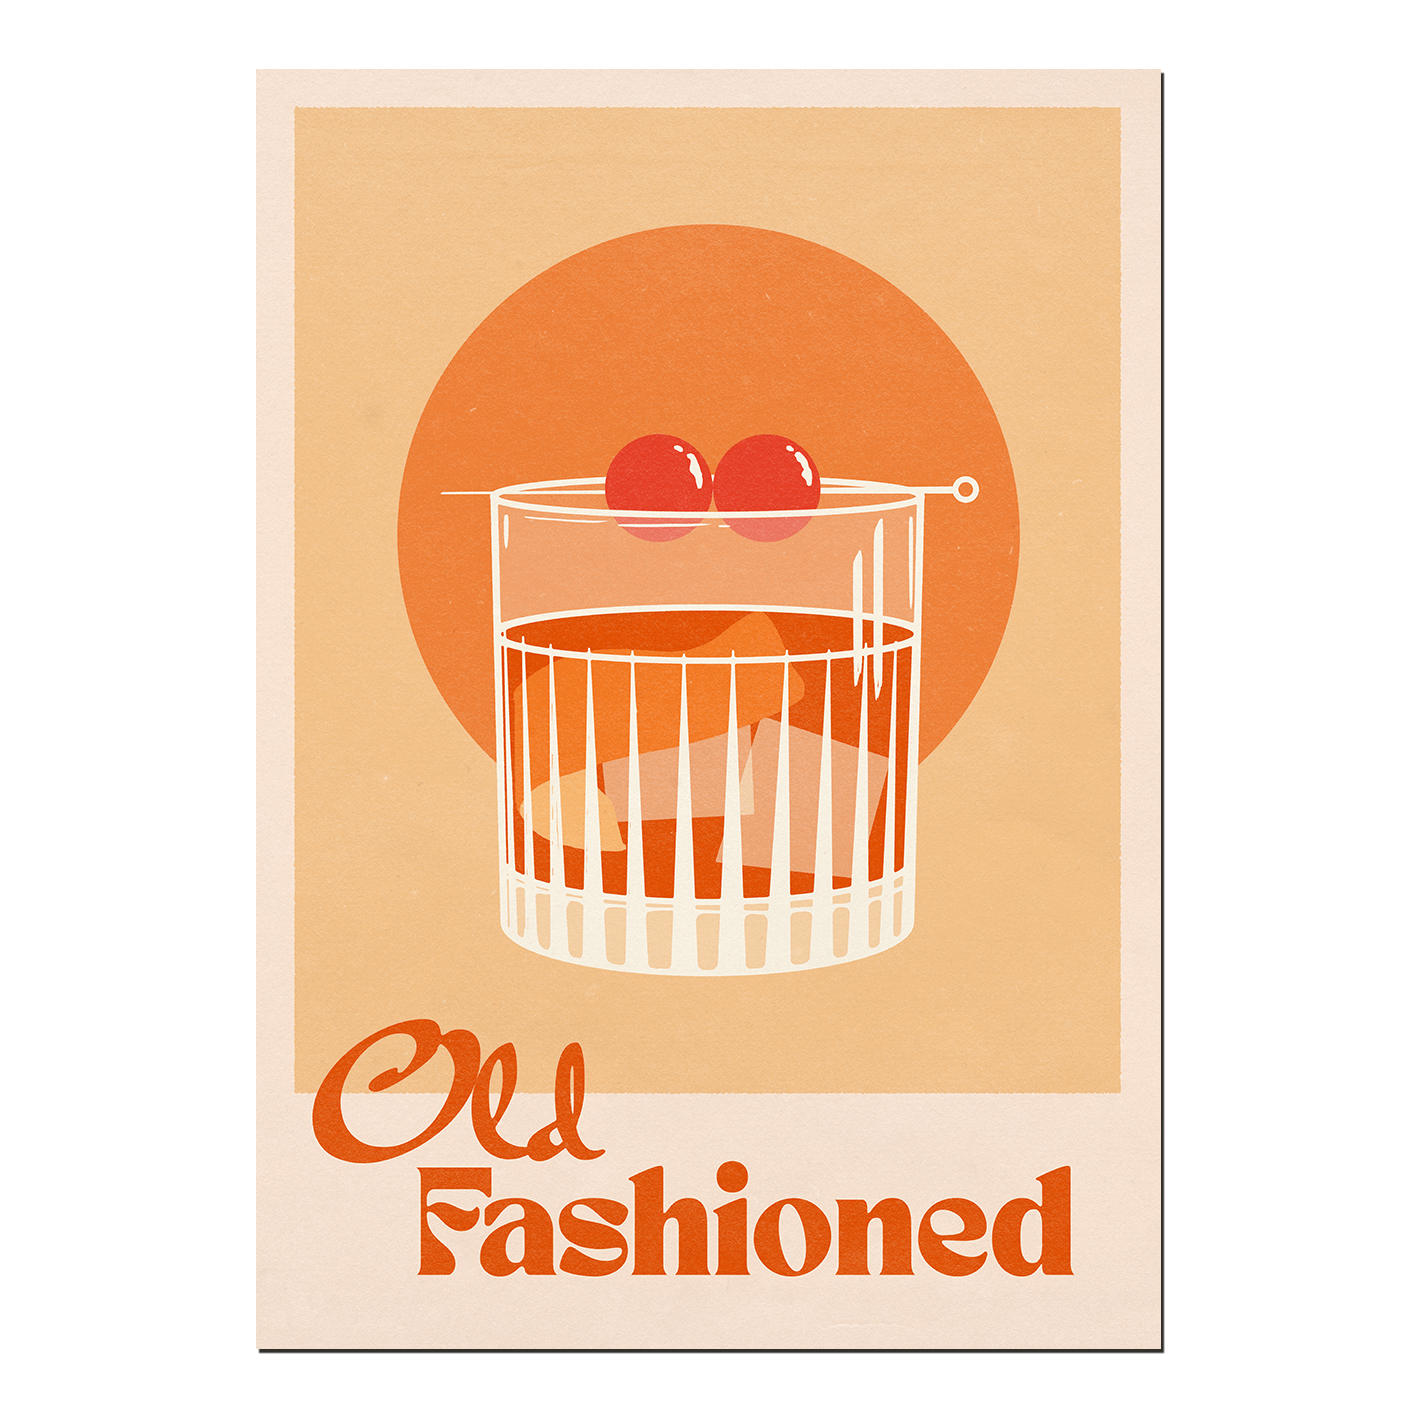 'Old Fashioned' Print